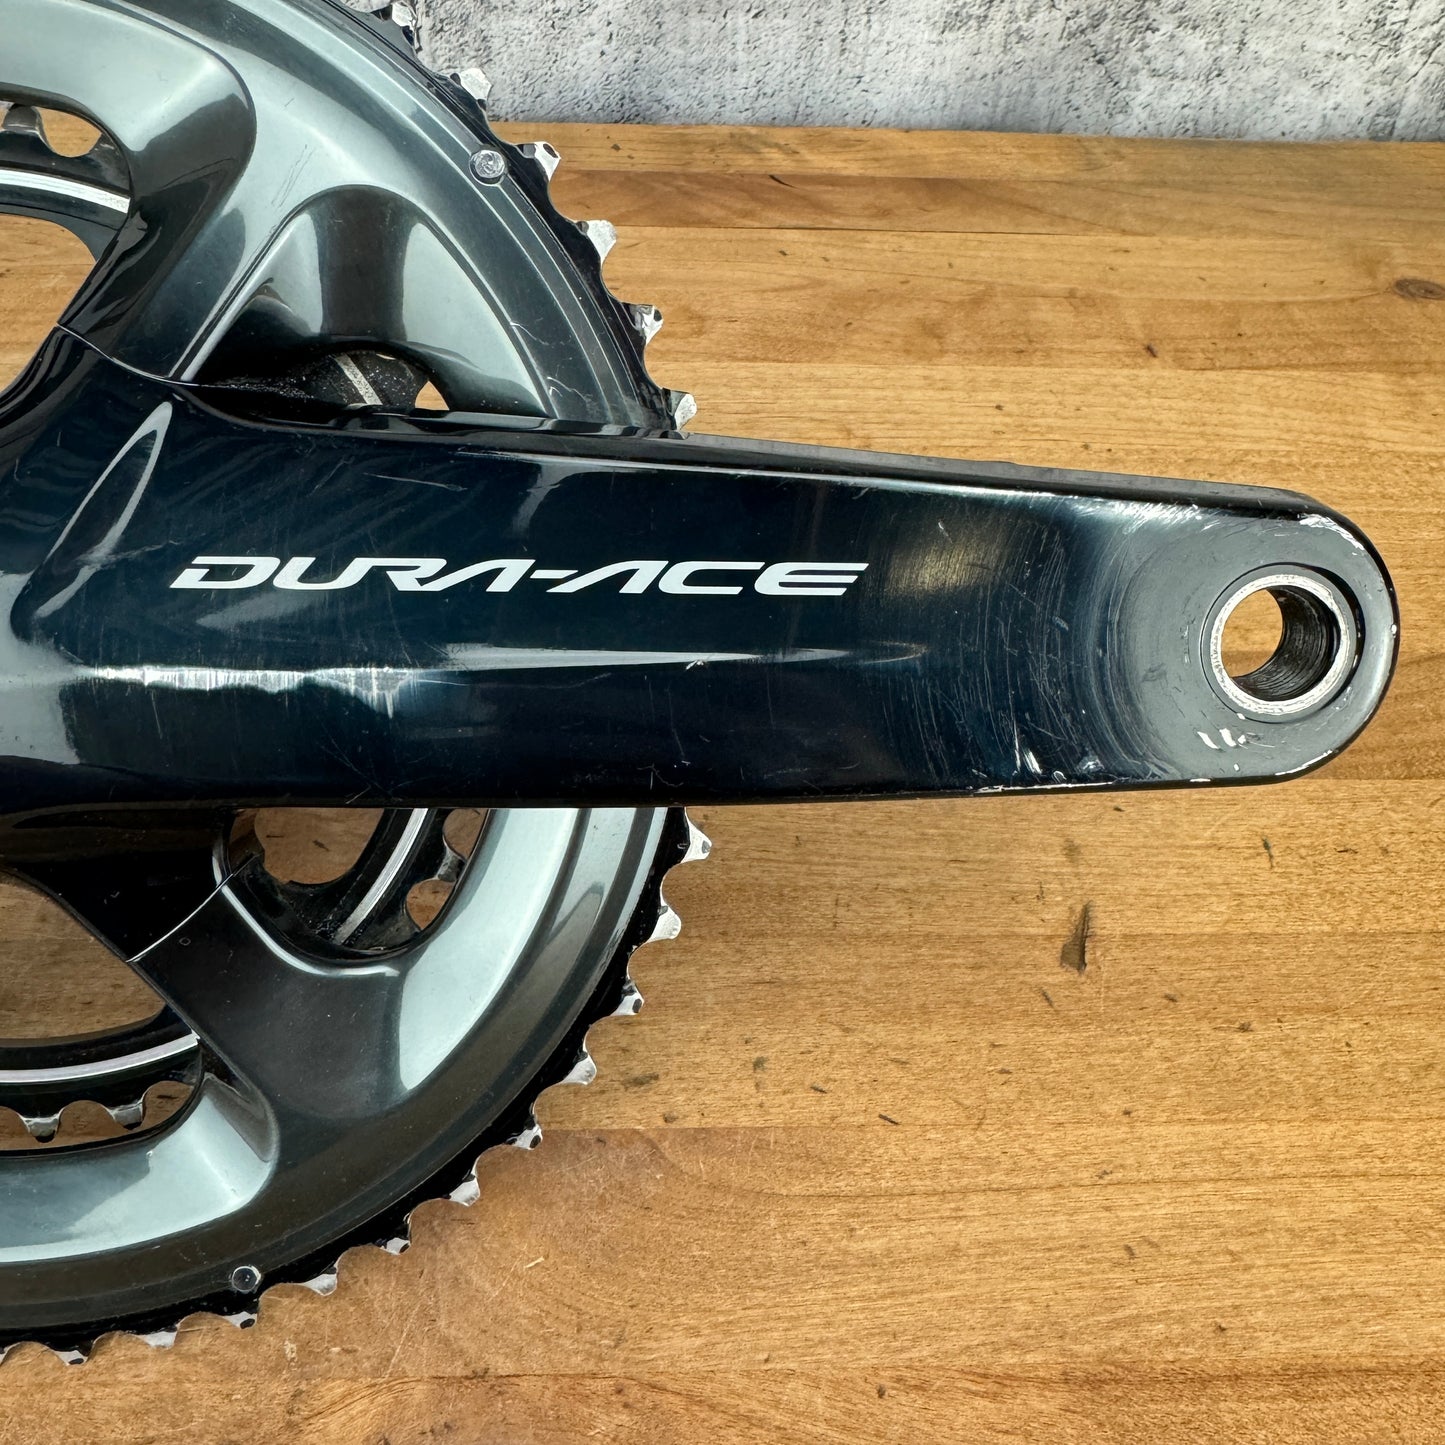 Shimano Dura-Ace FC-R9100 172.5mm 52/36t 11 Speed 24mm Spindle Crankset 644g